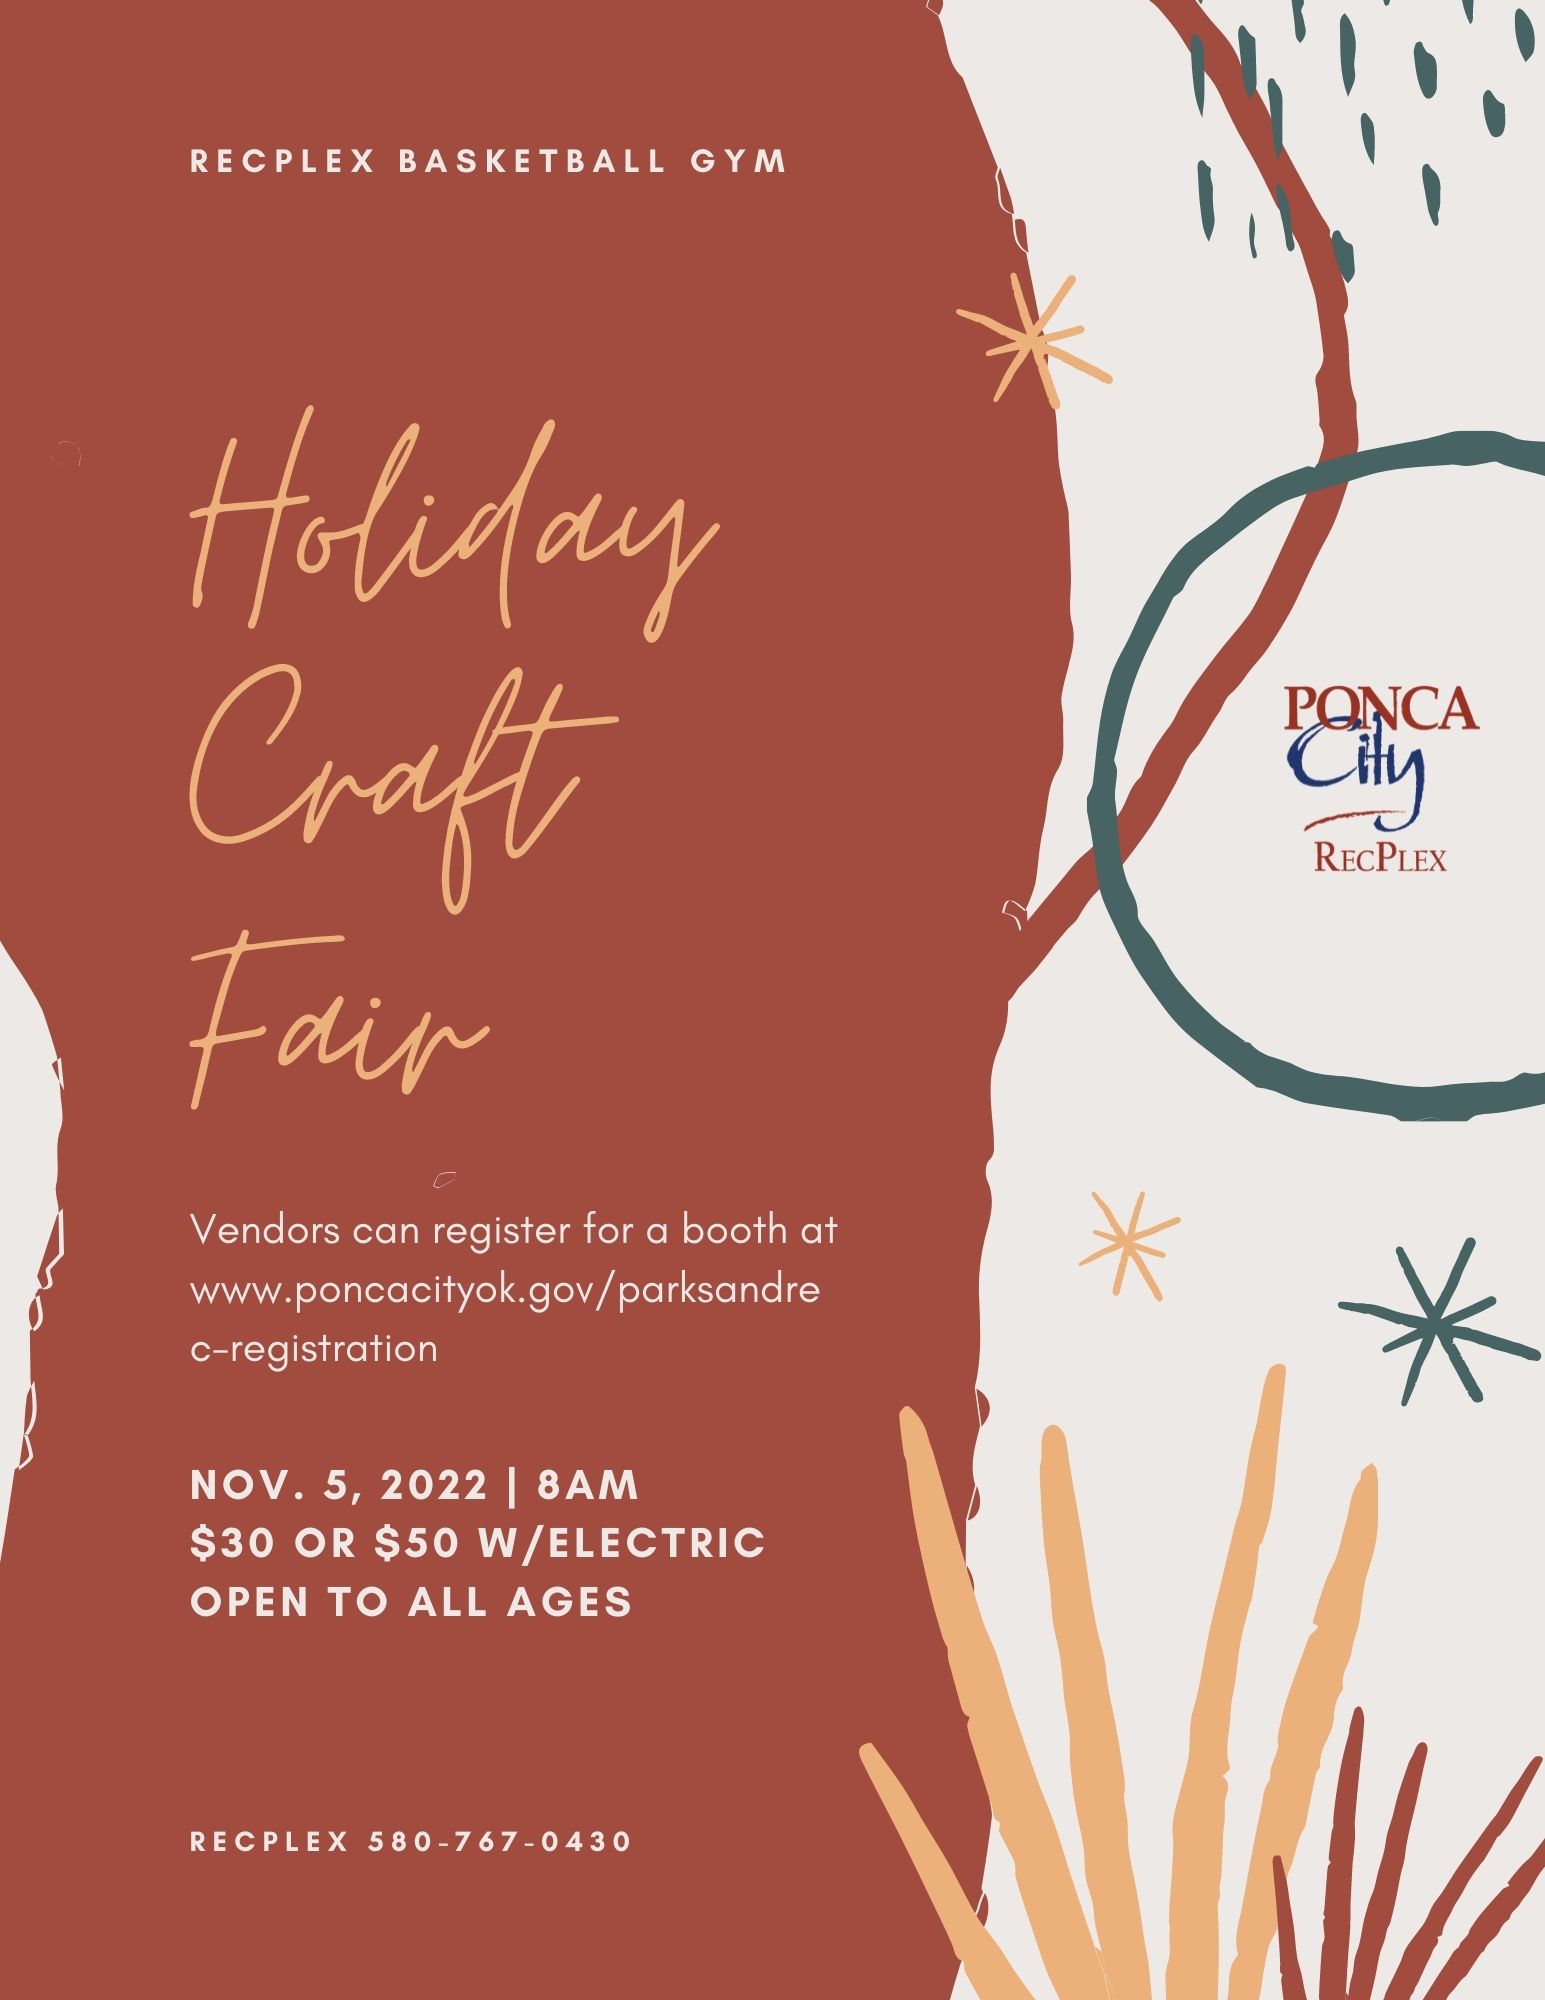 Registration Open for 2022 Holiday Craft Fair in Ponca City